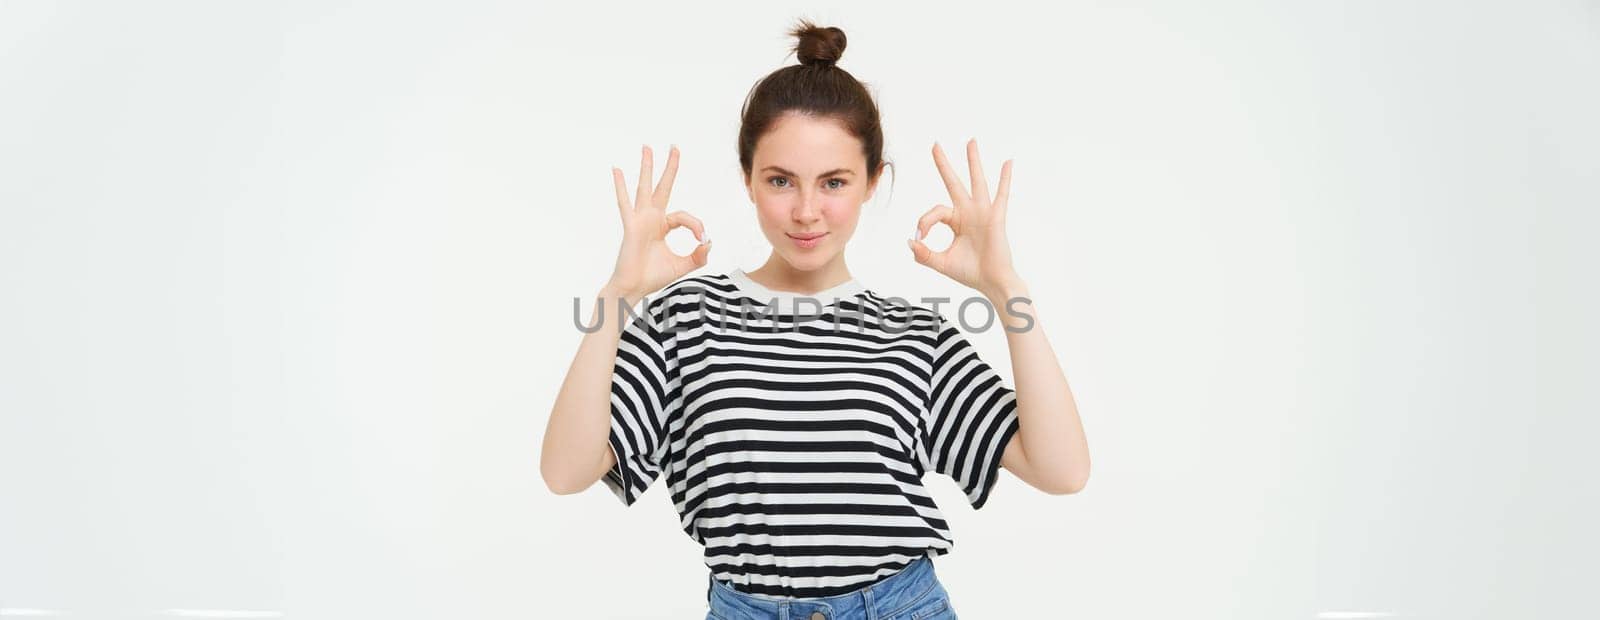 No problem, excellent choice. Smiling, confident young woman, showing okay, ok sign, zero gesture, recommends product, stands over white background.